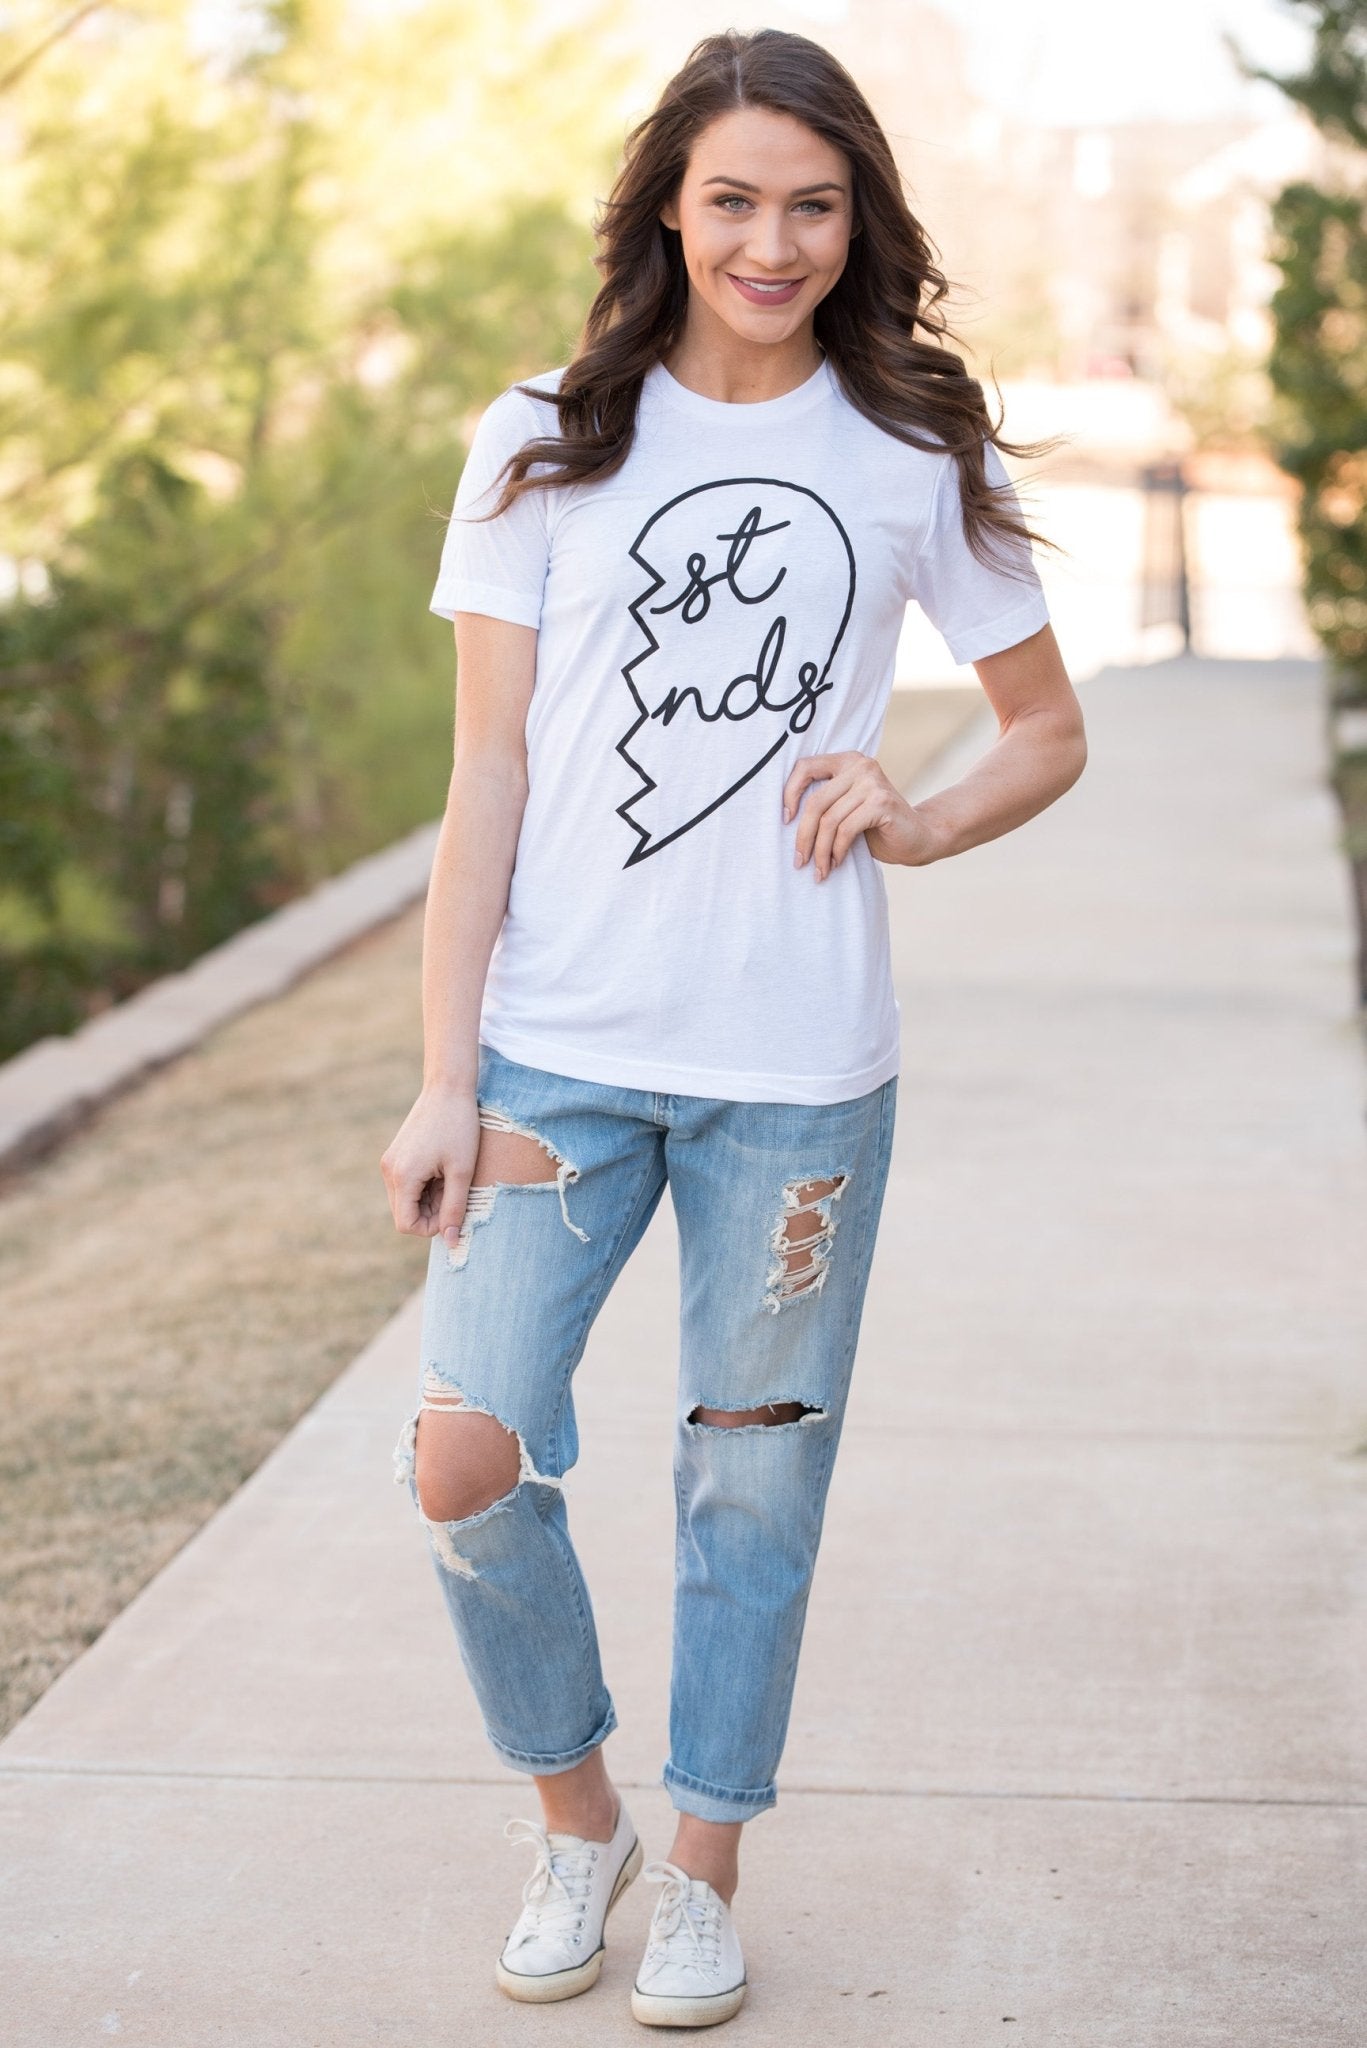 RIGHT side best friends t-shirt white - Trendy T-shirts - Cute Graphic Tee Fashion at Lush Fashion Lounge Boutique in Oklahoma